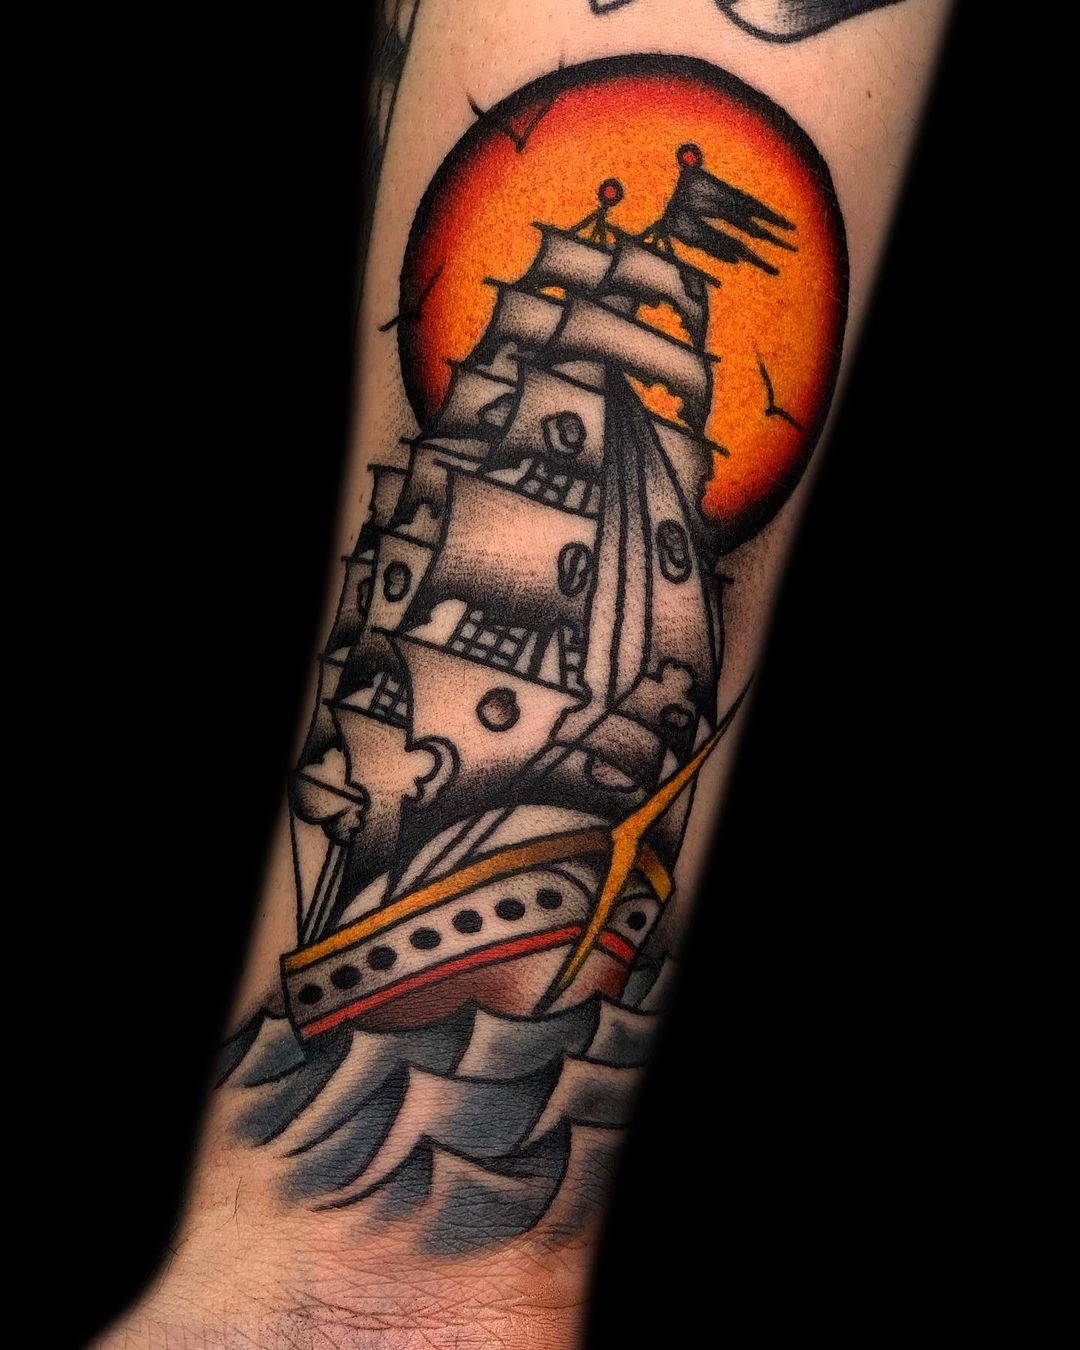 Ship tattoo by